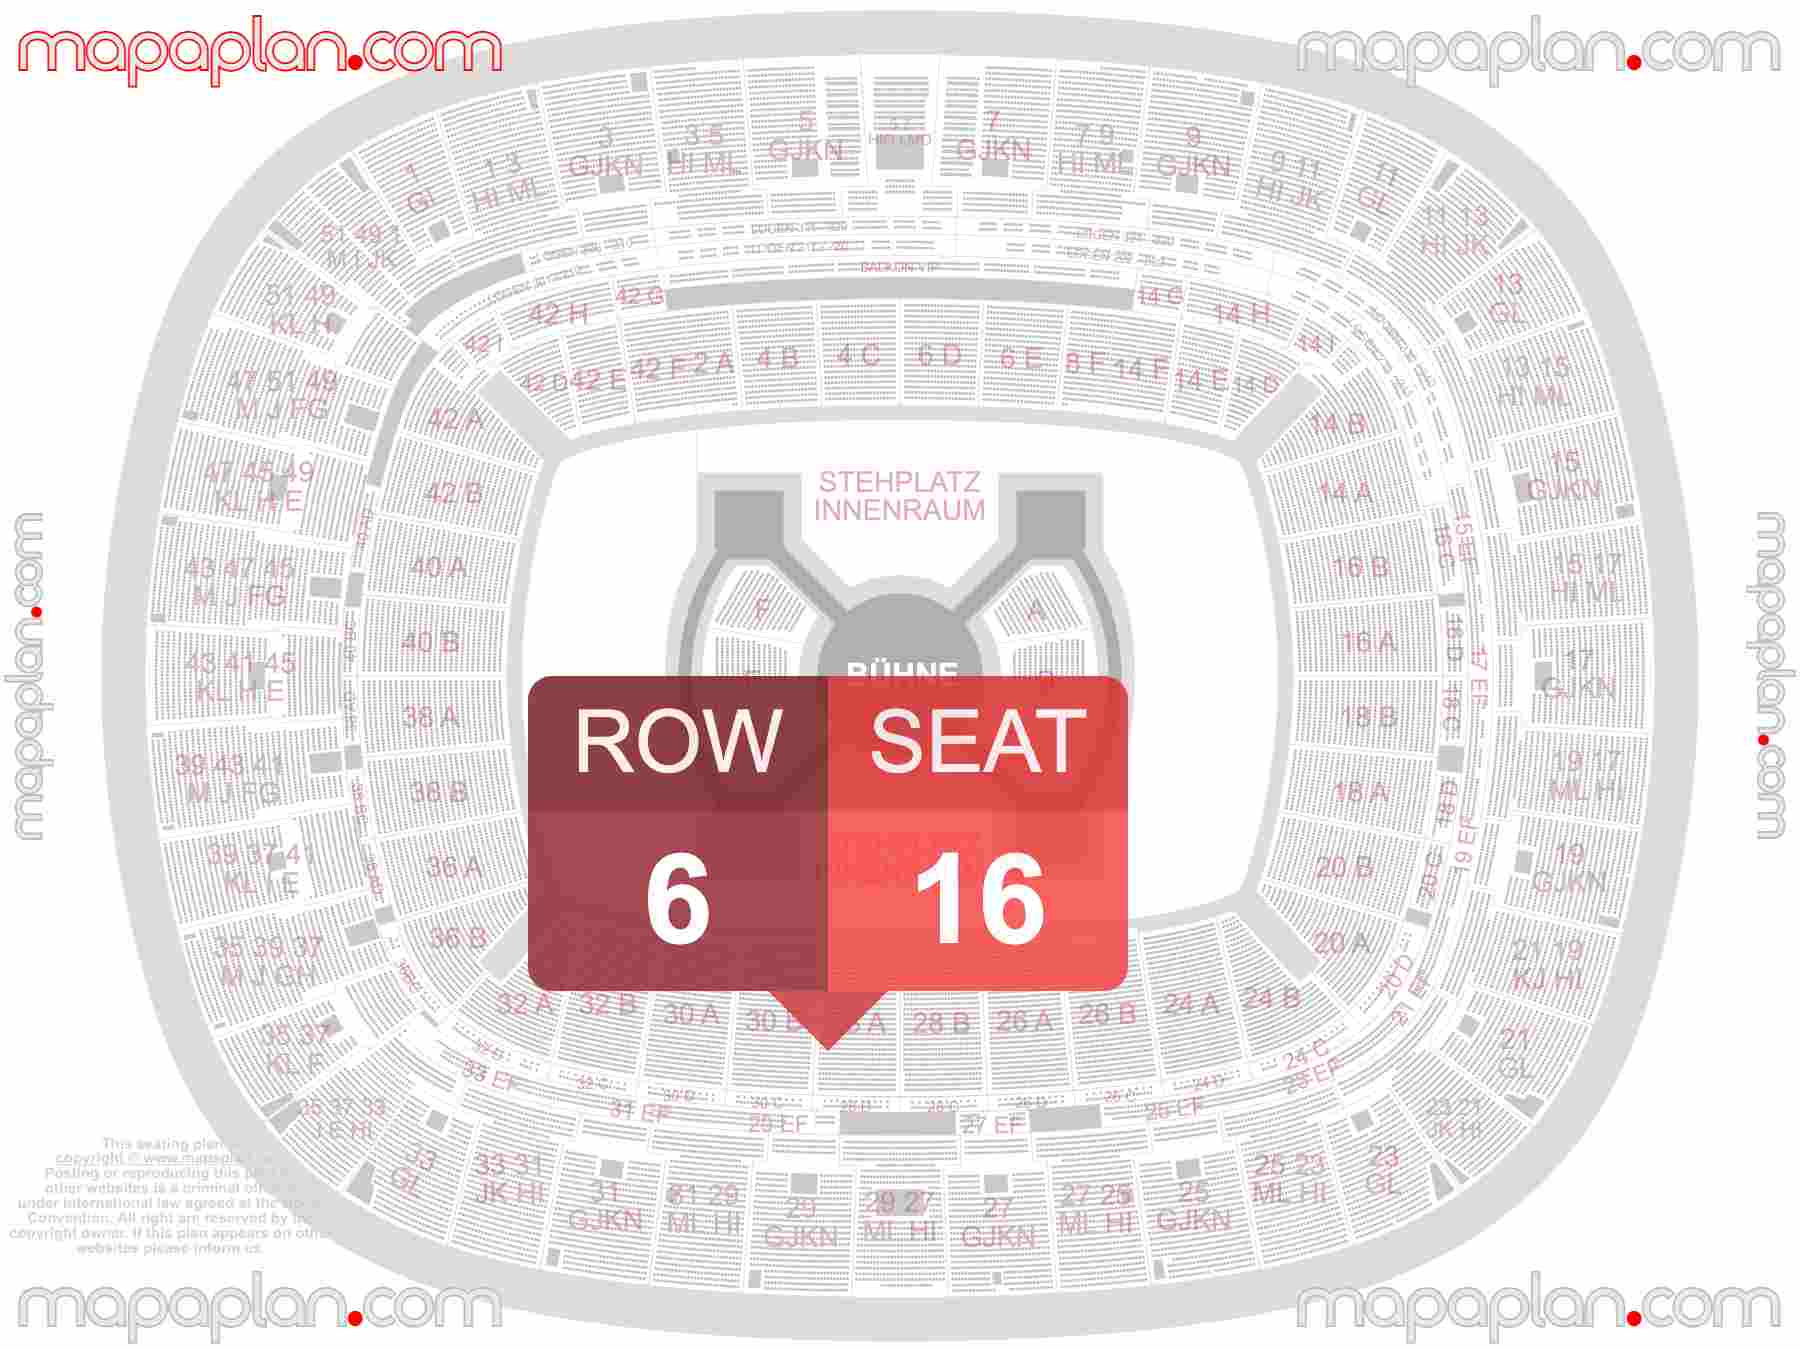 Frankfurt am Main Deutsche Bank Park Waldstadion seating plan Concert 360 in the round stage seating plan with exact section numbers showing best rows and seats selection 3d layout - Best interactive seat finder tool with precise detailed location data